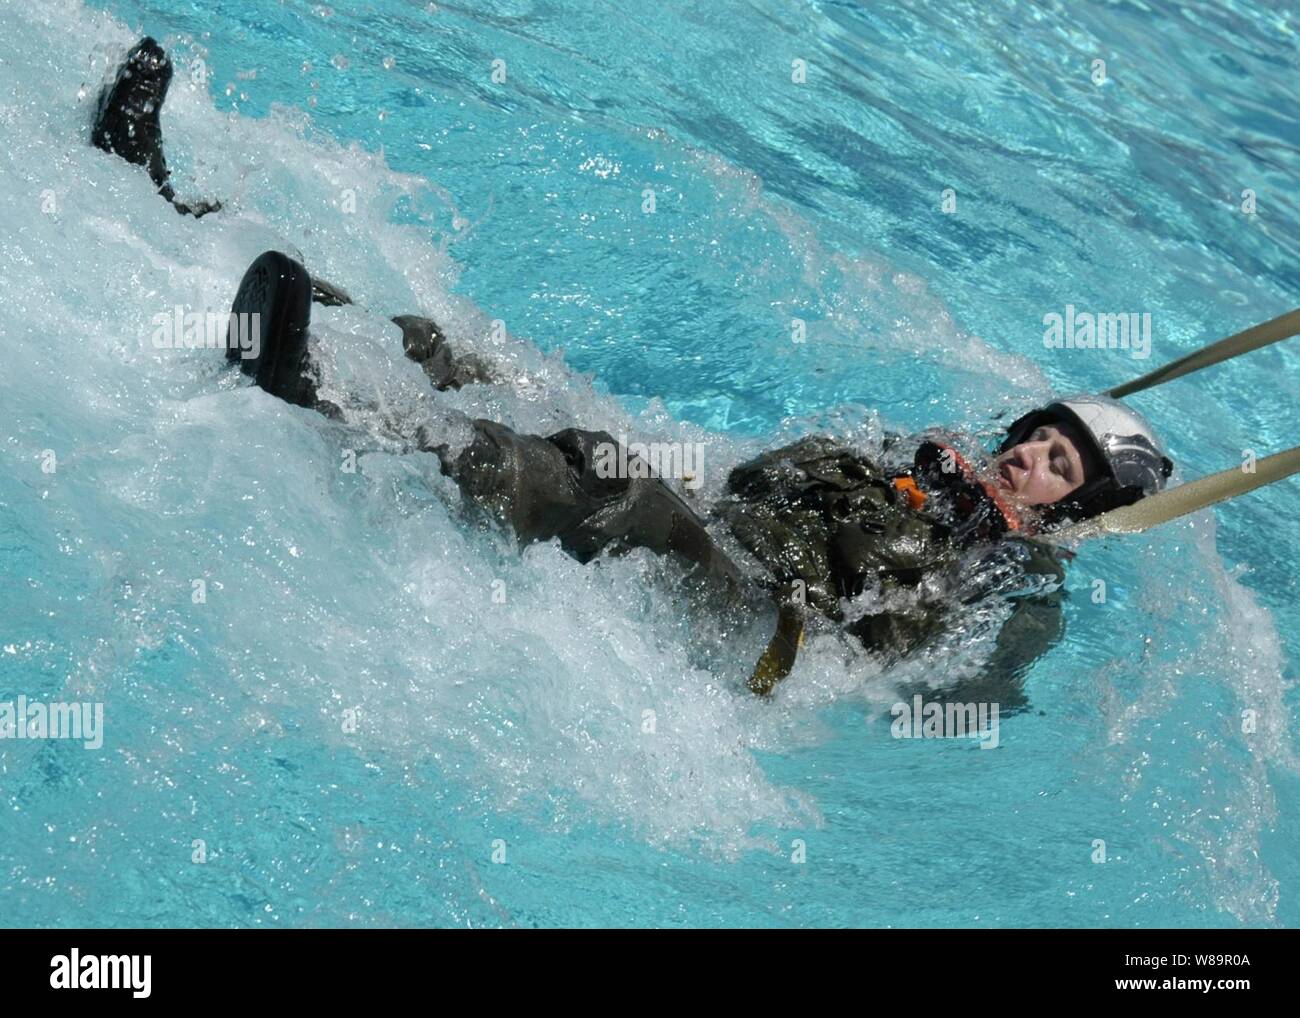 An aircrew student is dragged through a pool at the Aviation Survival Training Center to simulate an ejection seat being pulled by a parachute in water on June 23, 2005. The Training Center at Marine Corps Air Station Miramar, Calif., provides aviation physiology and water survival training for pilots and aircrew. Stock Photo